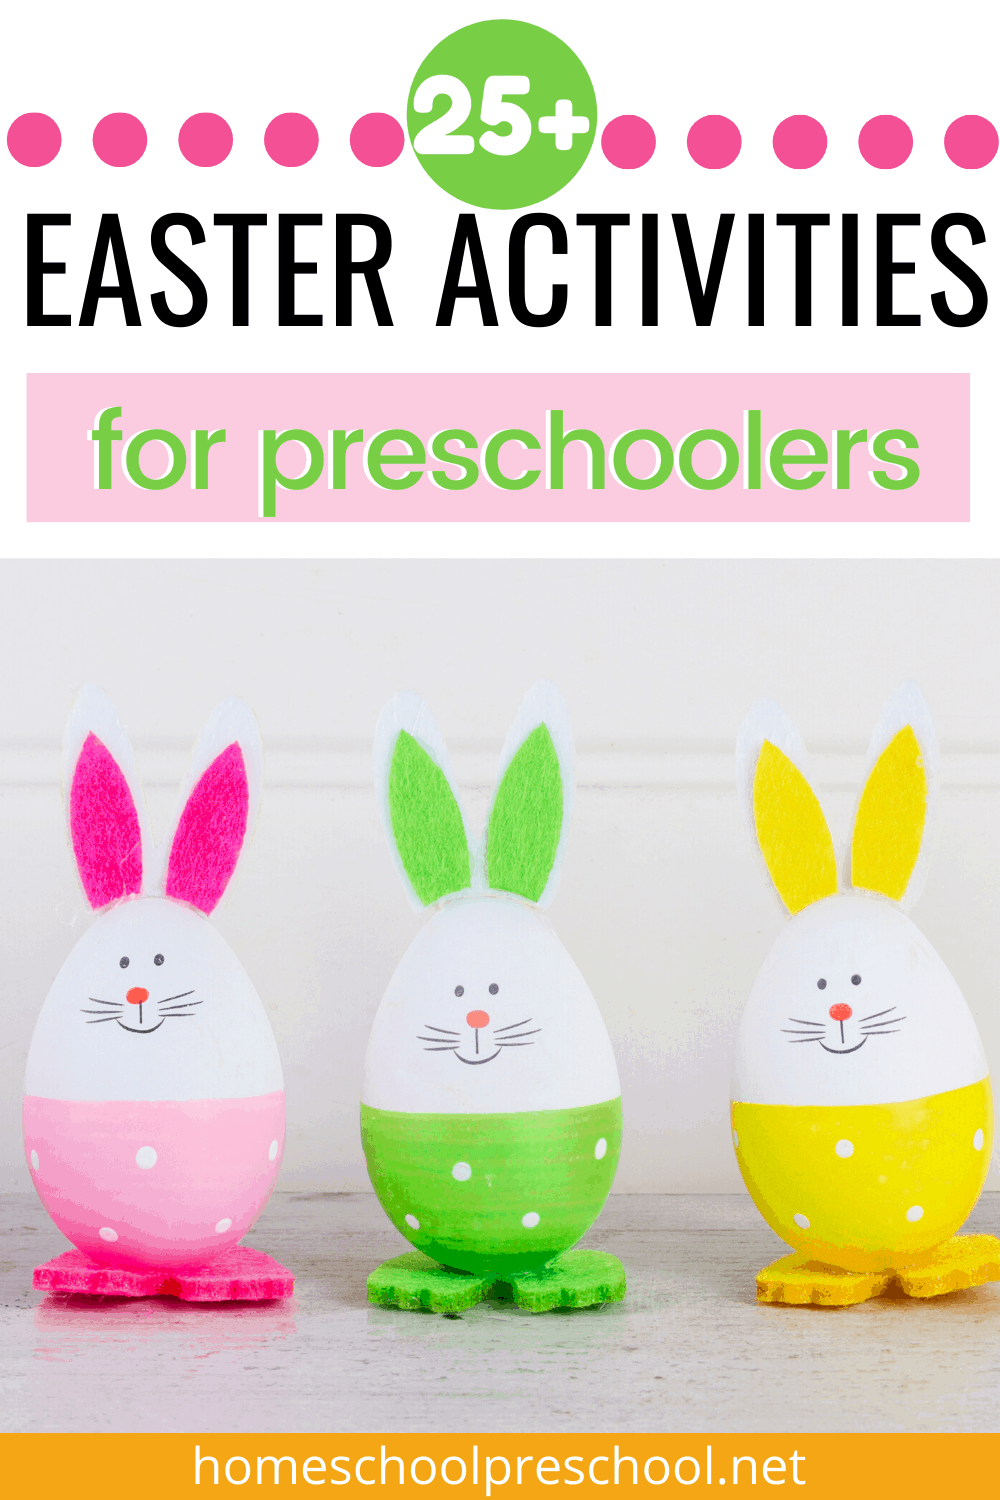 Spring has sprung which means Easter is on its way. You don't want to miss these Easter activities for preschoolers! Books, printables, snacks, and more!